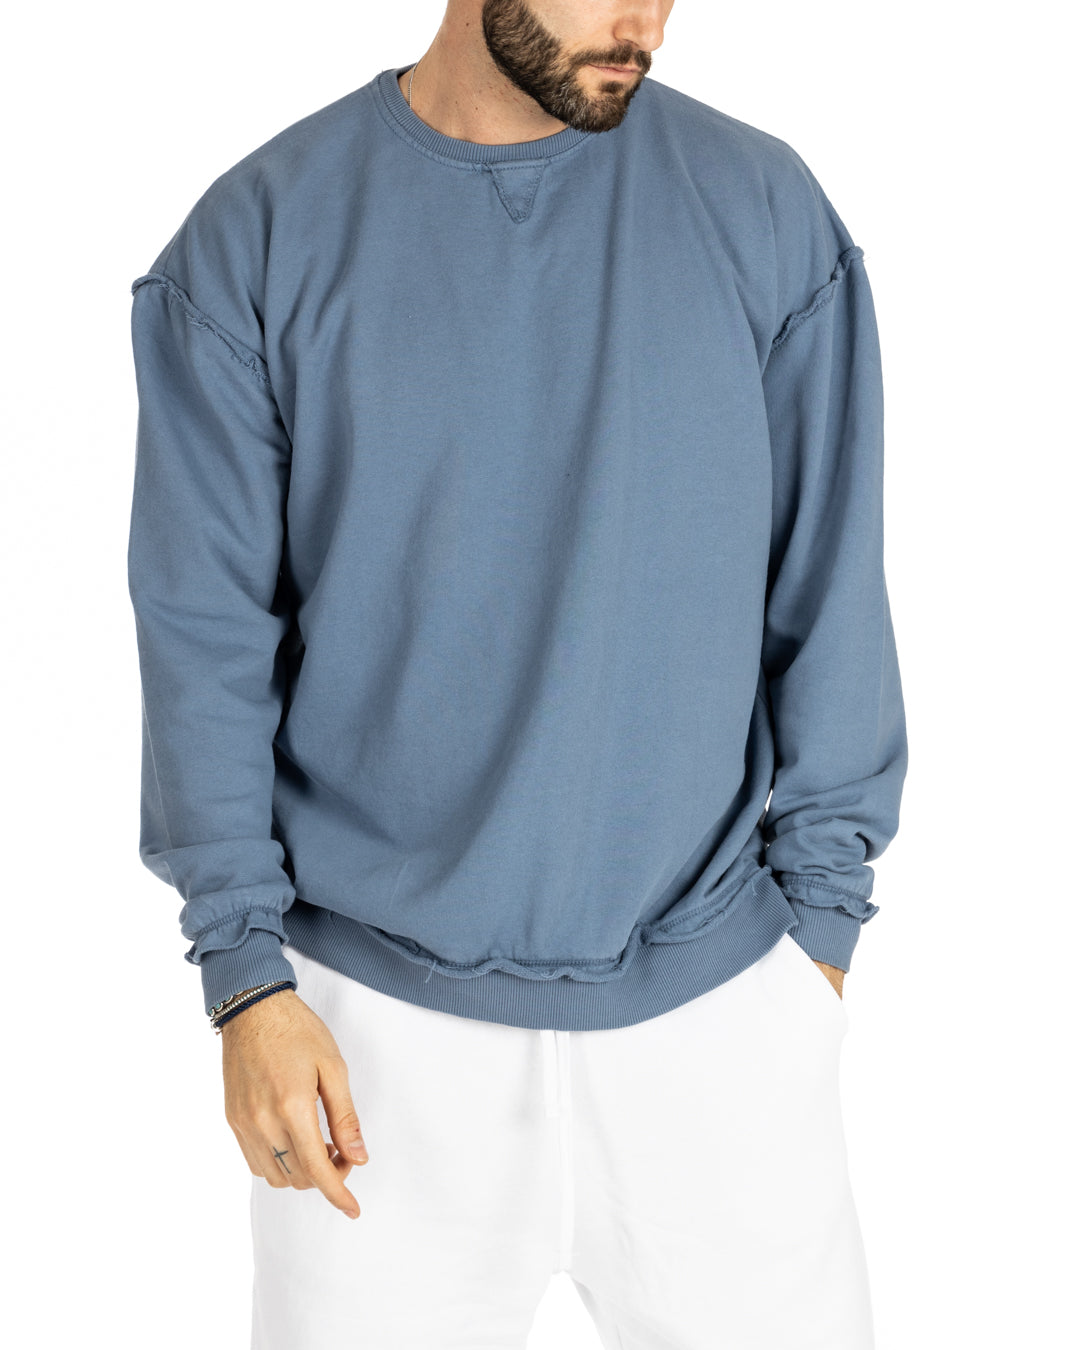 KYOTO - OVERSIZED SWEATSHIRT WITH VISIBLE LIGHT BLUE SEAMS